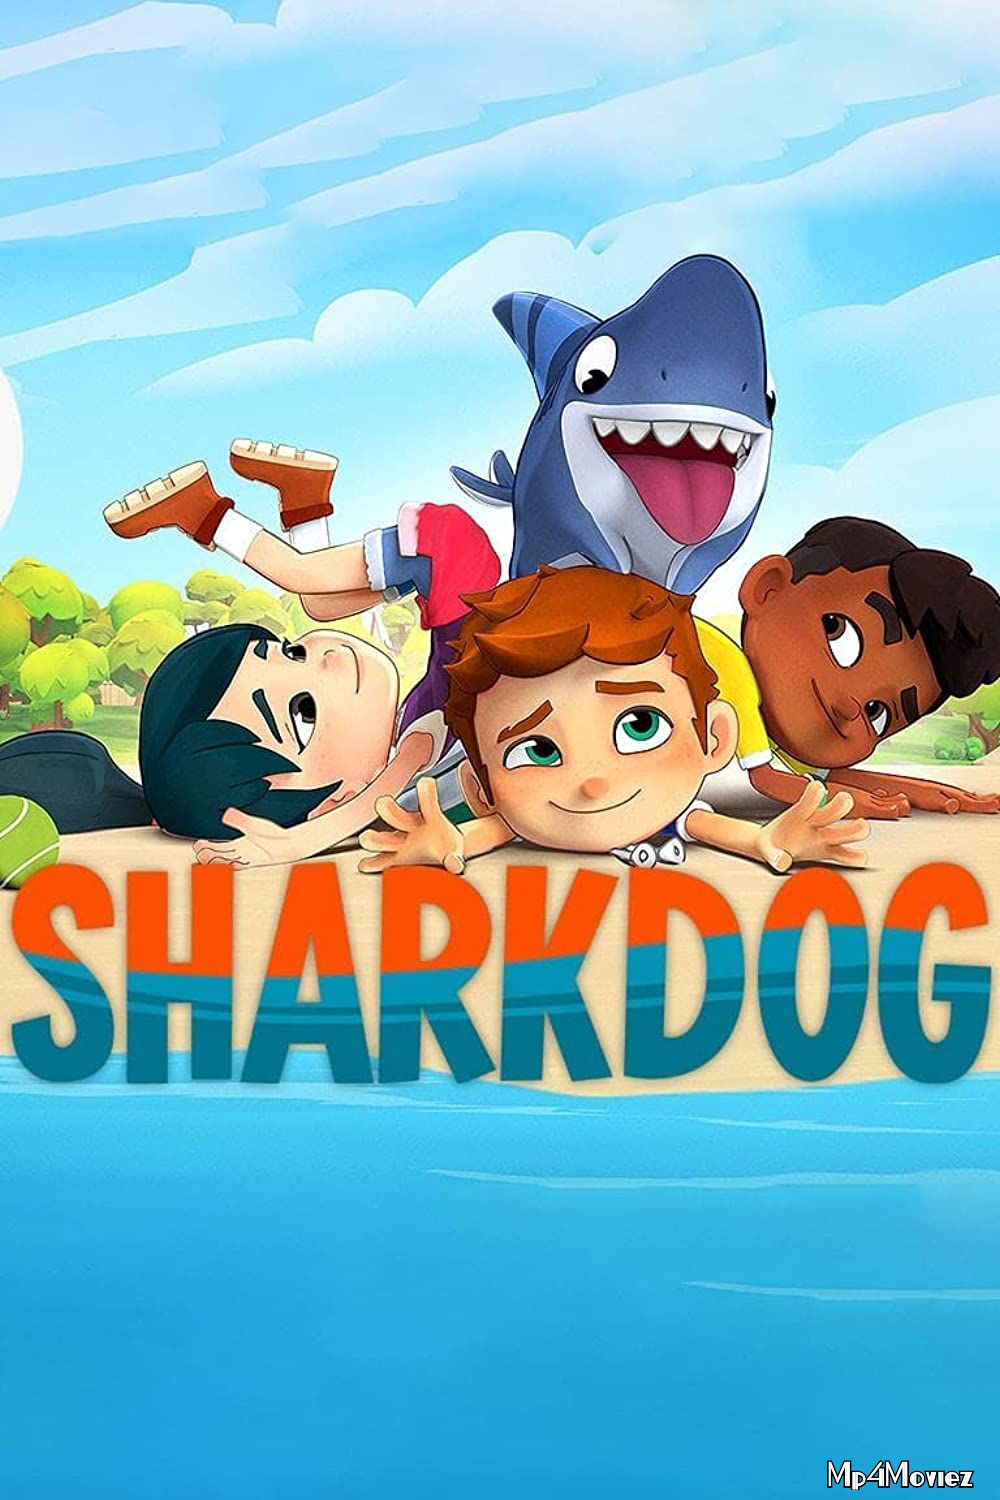 Sharkdog (2021) S01 Hindi Dubbed Complete NF Series download full movie